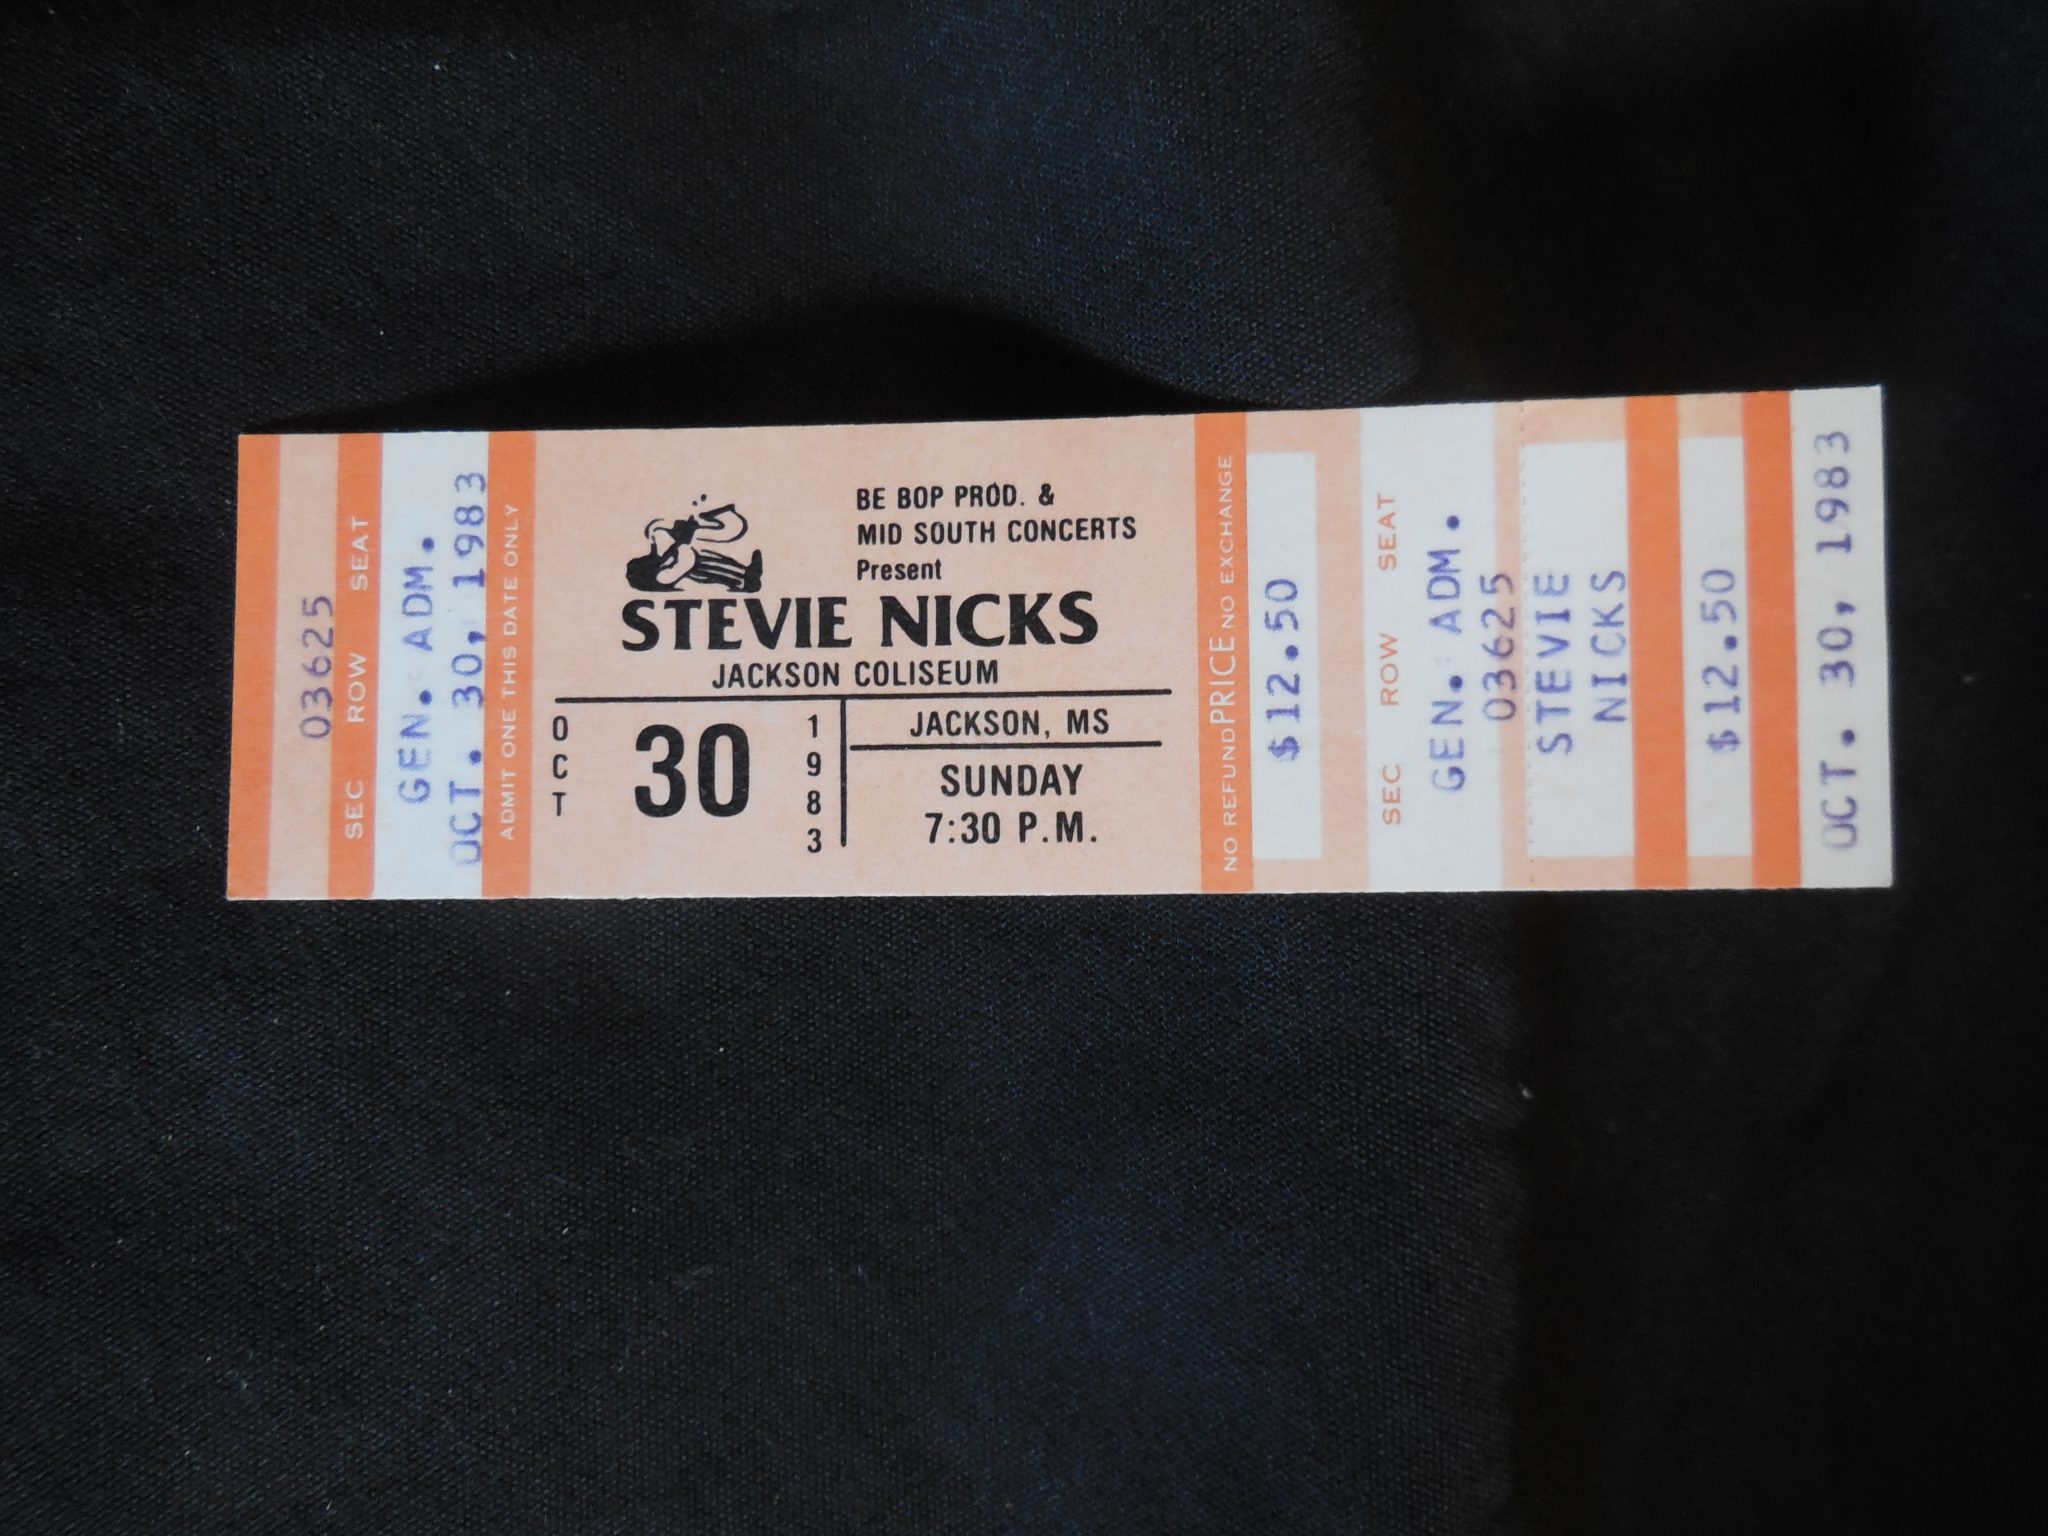 Stevie Nicks(Fleetwood Mac) 1983 Ticket Very English and Rolling Stone